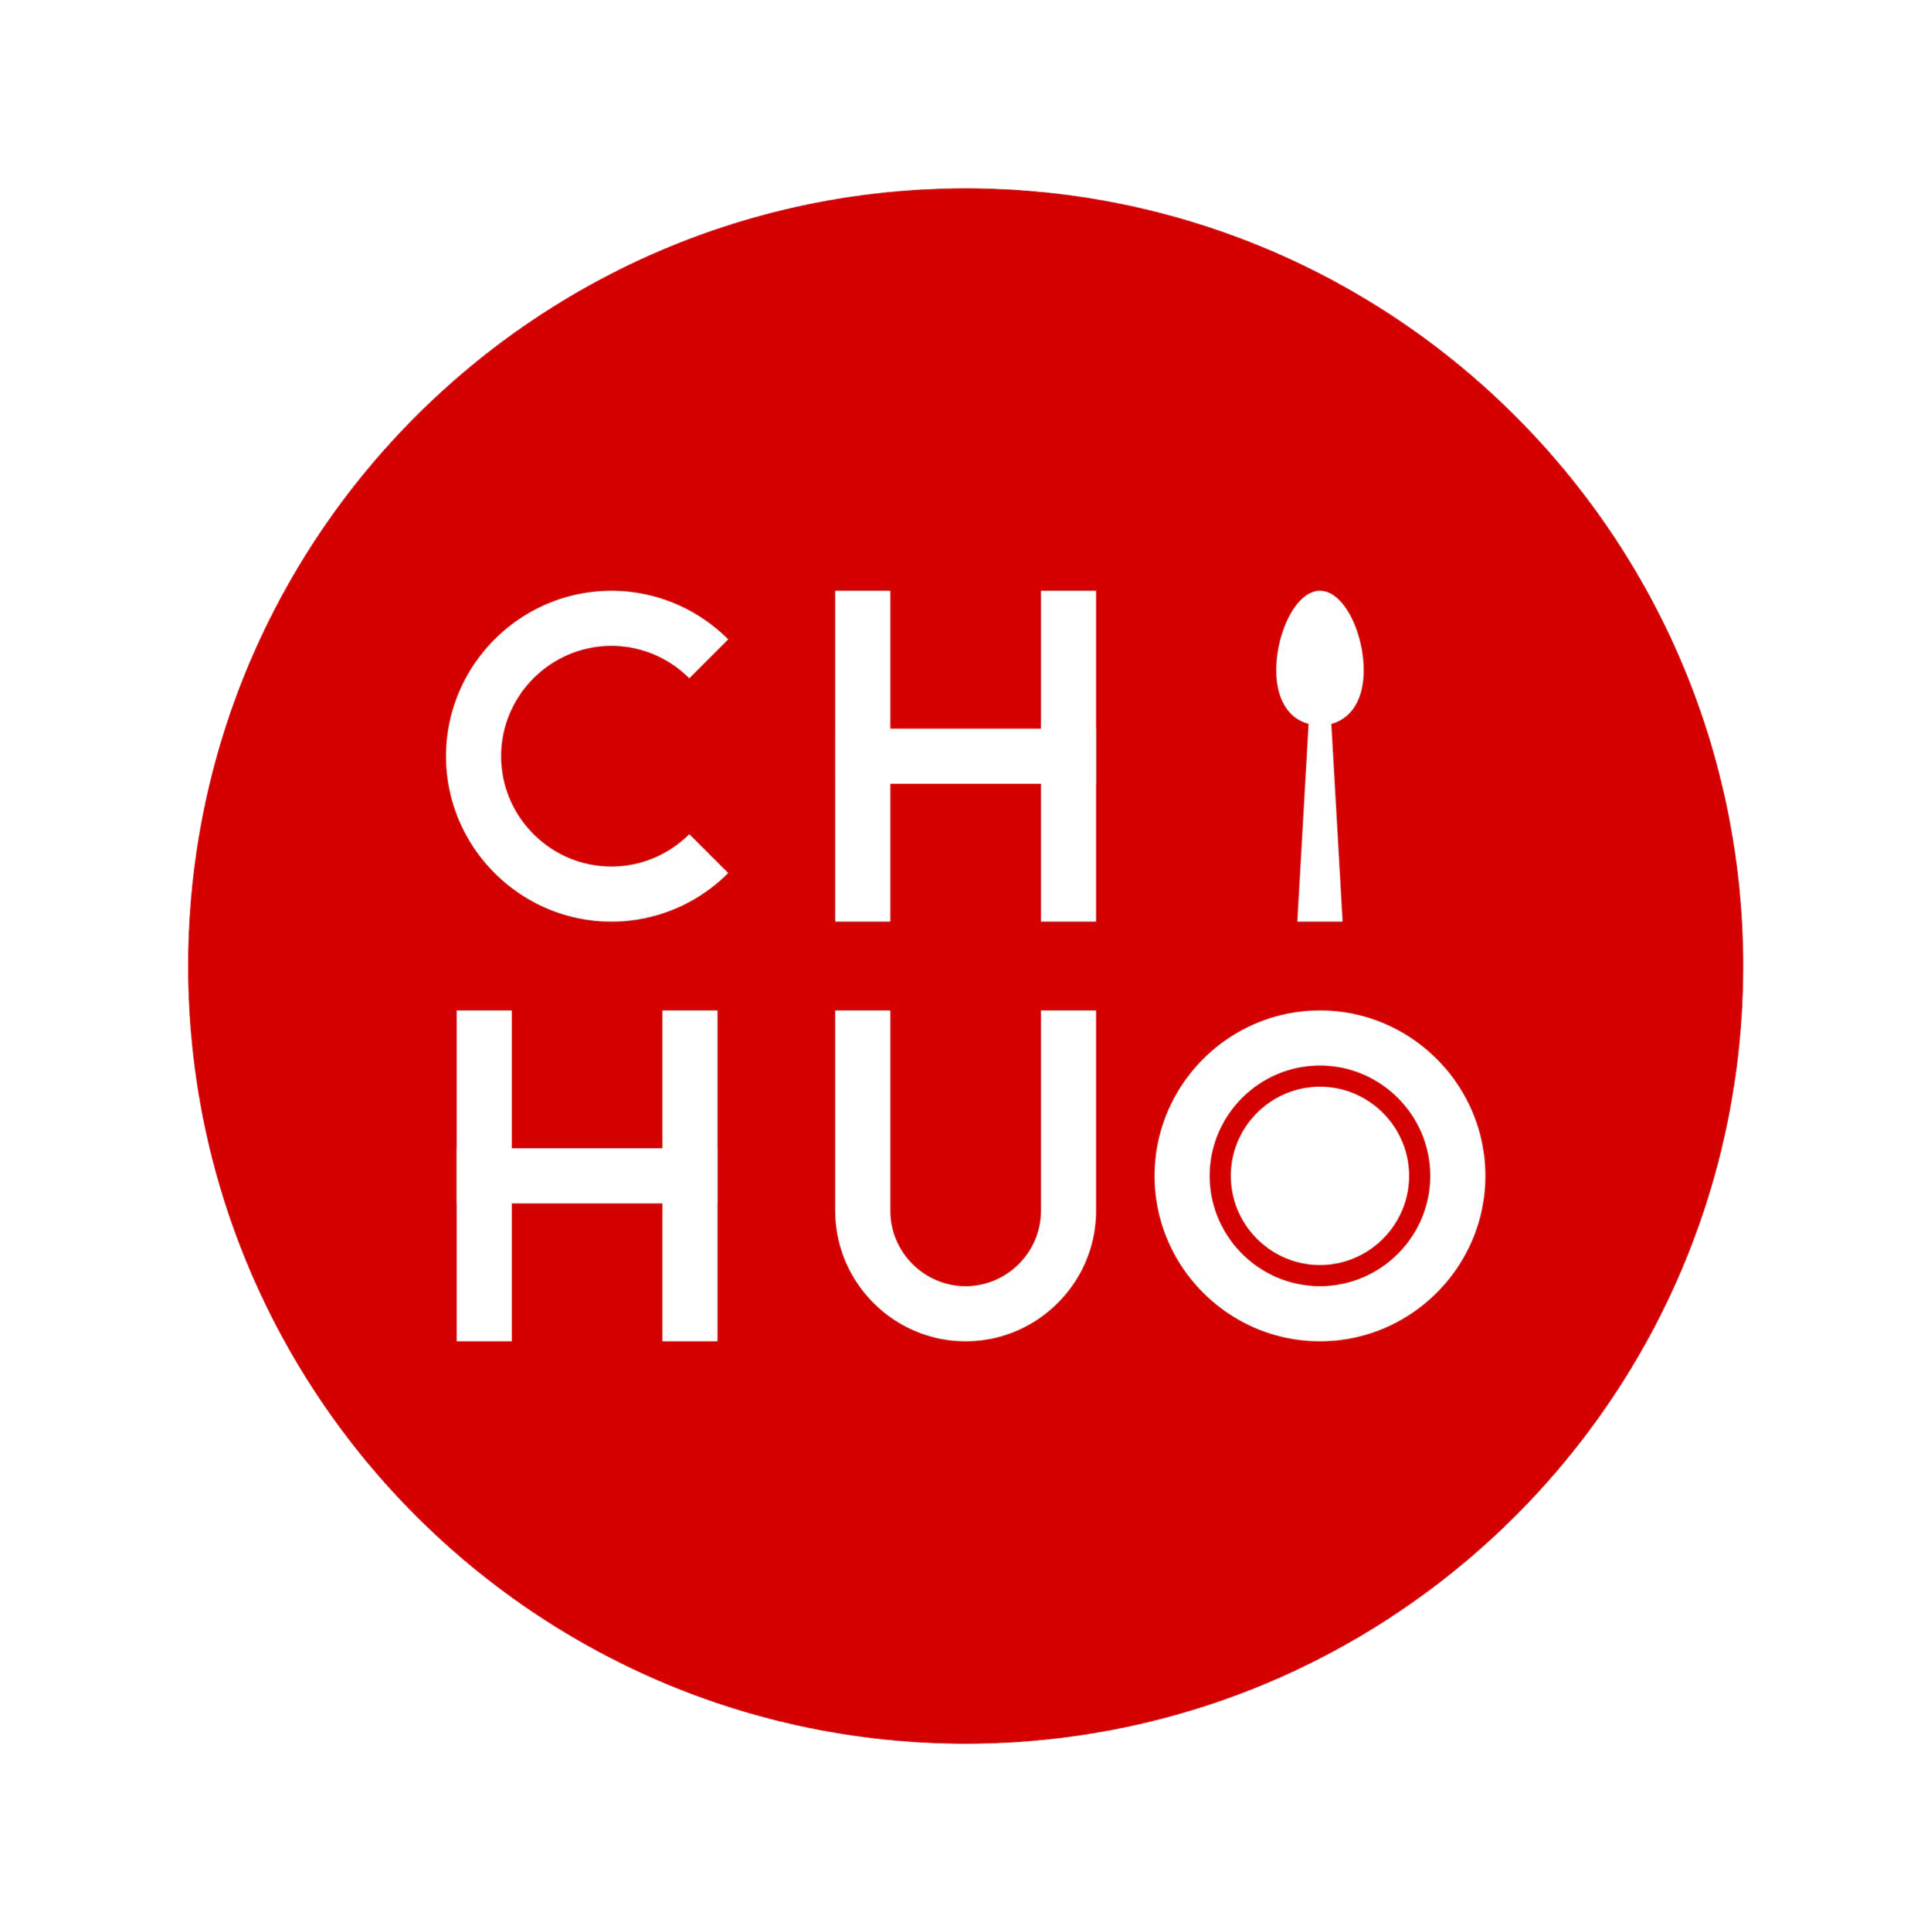 CHIHUO_logo_round_2018.png.jpg